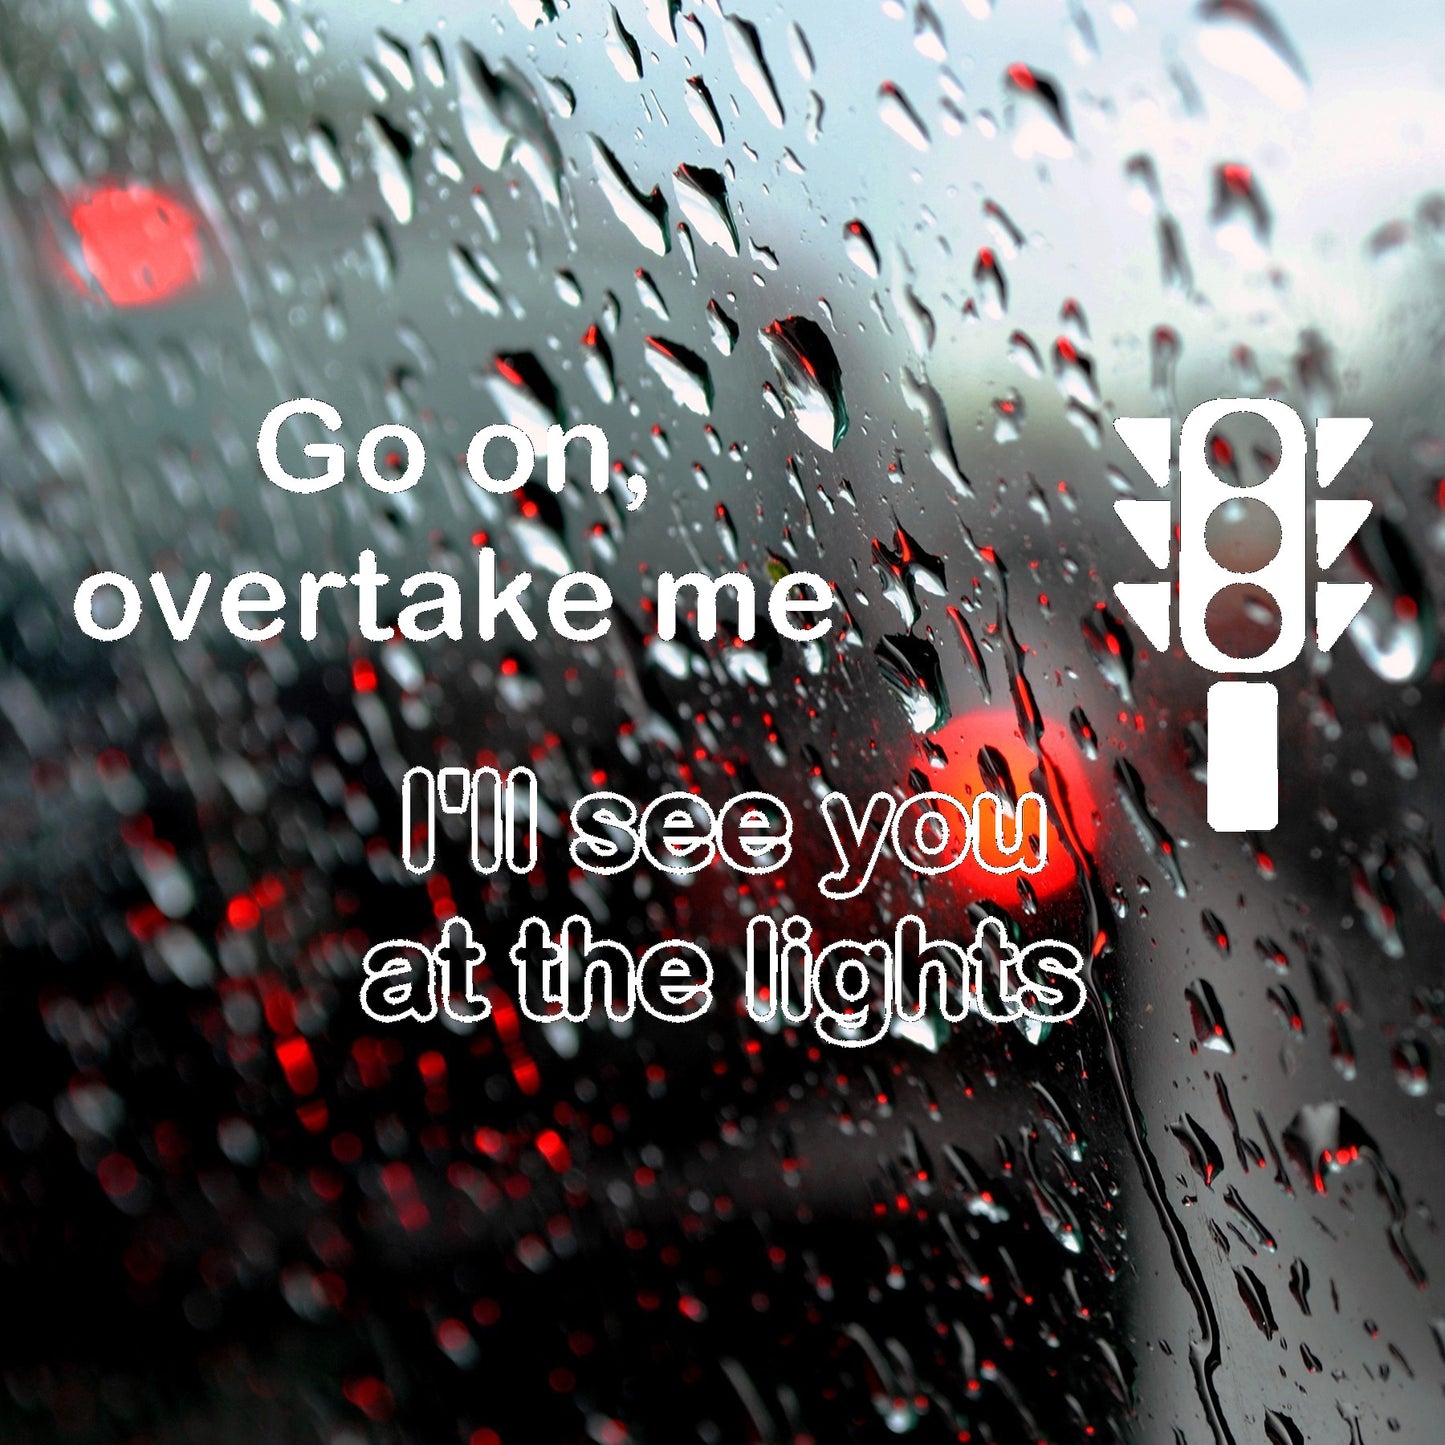 Go on overtake me, I'll see you at the lights | Bumper sticker - Adnil Creations